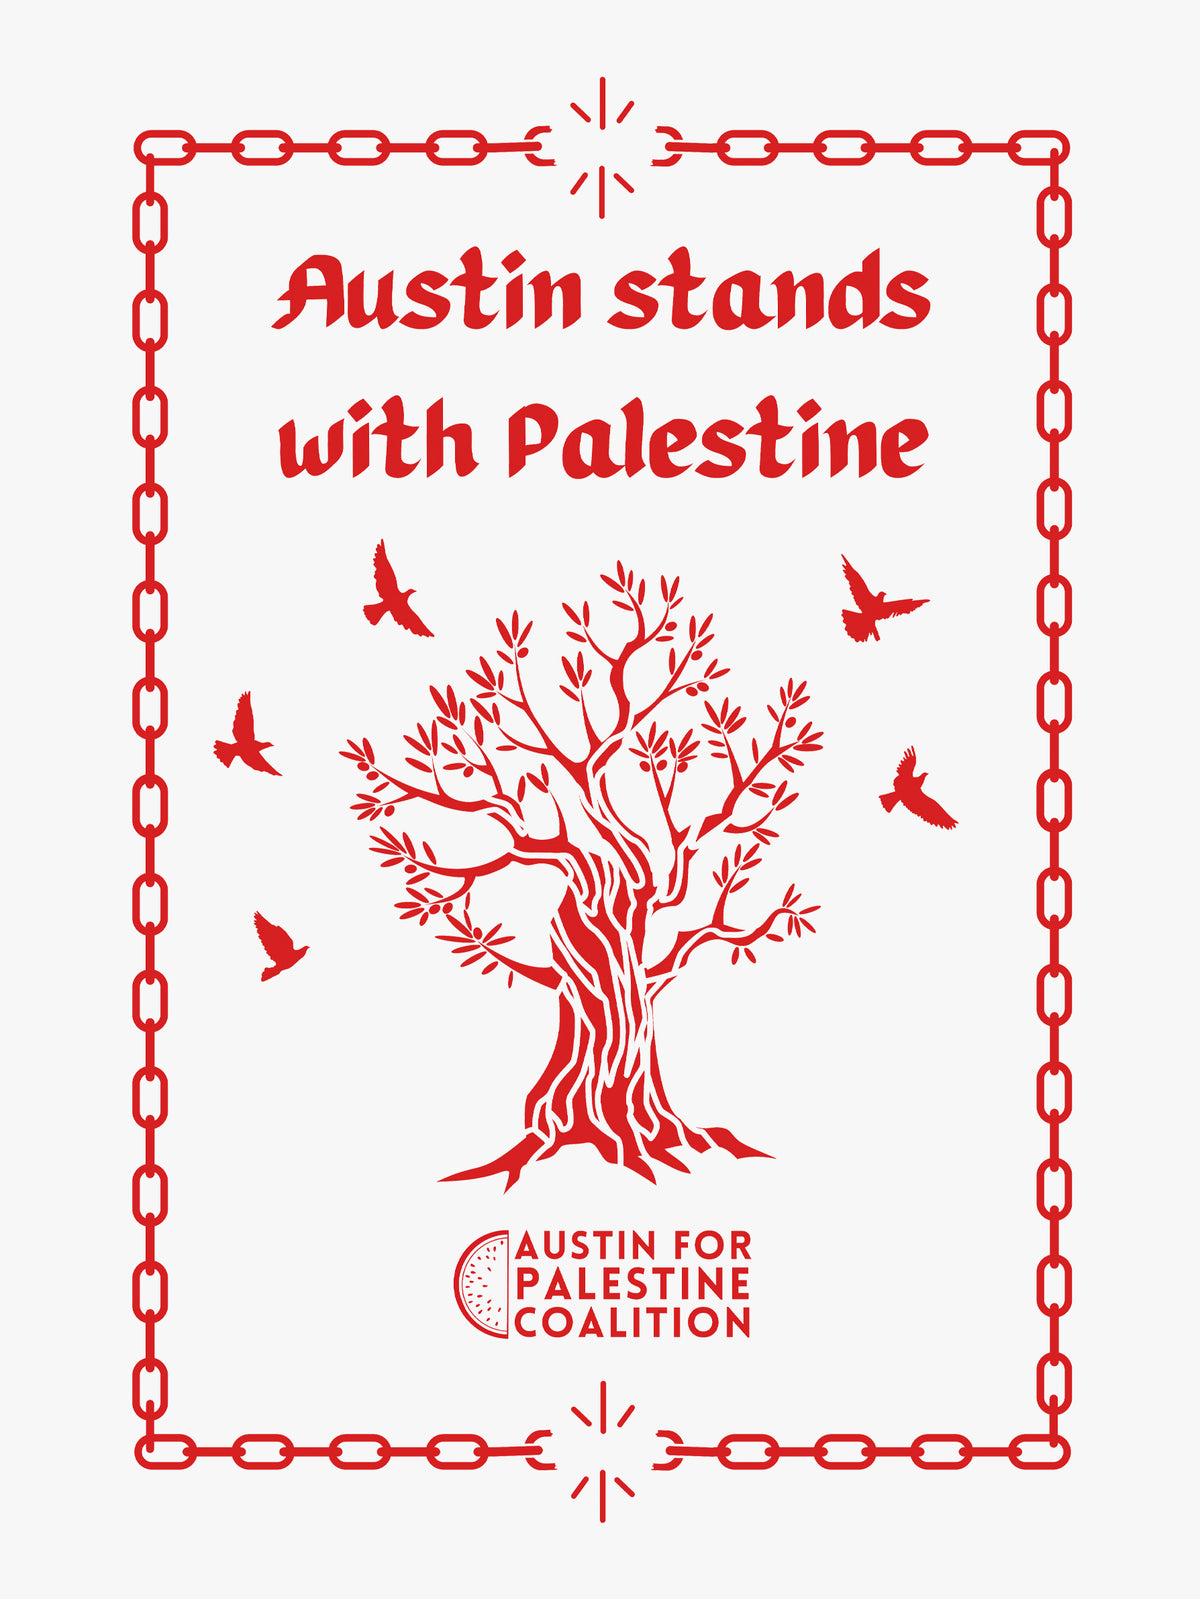 Austin stands with Palestine by Austin For Palestine Coalition